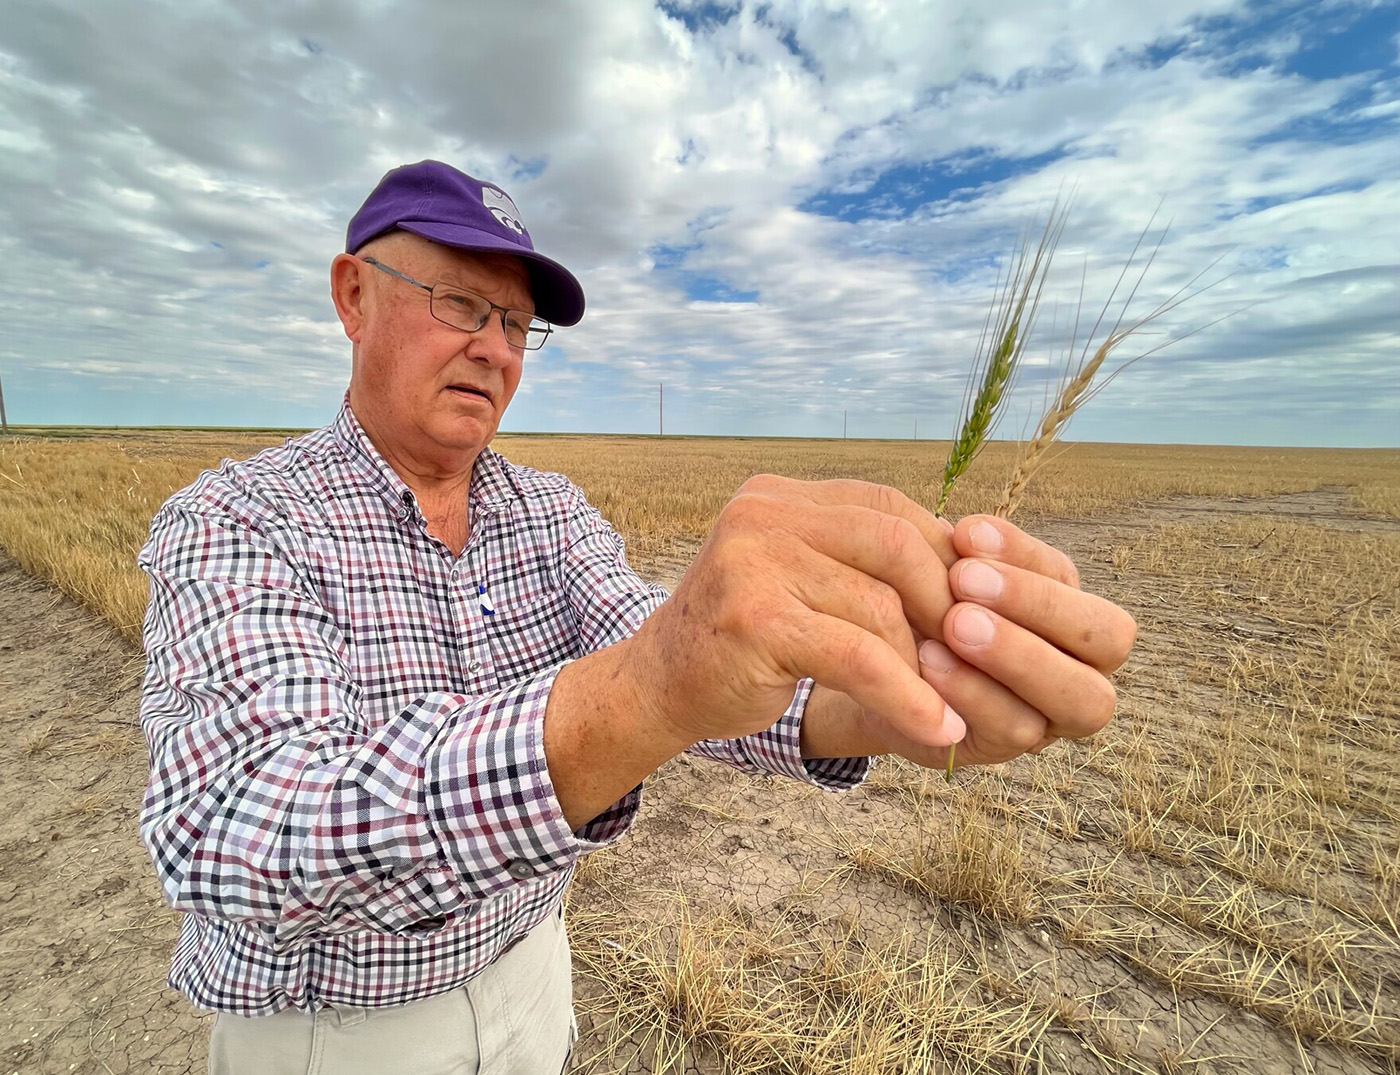 A man in a baseball cap holds two heads of wheat in his hands.